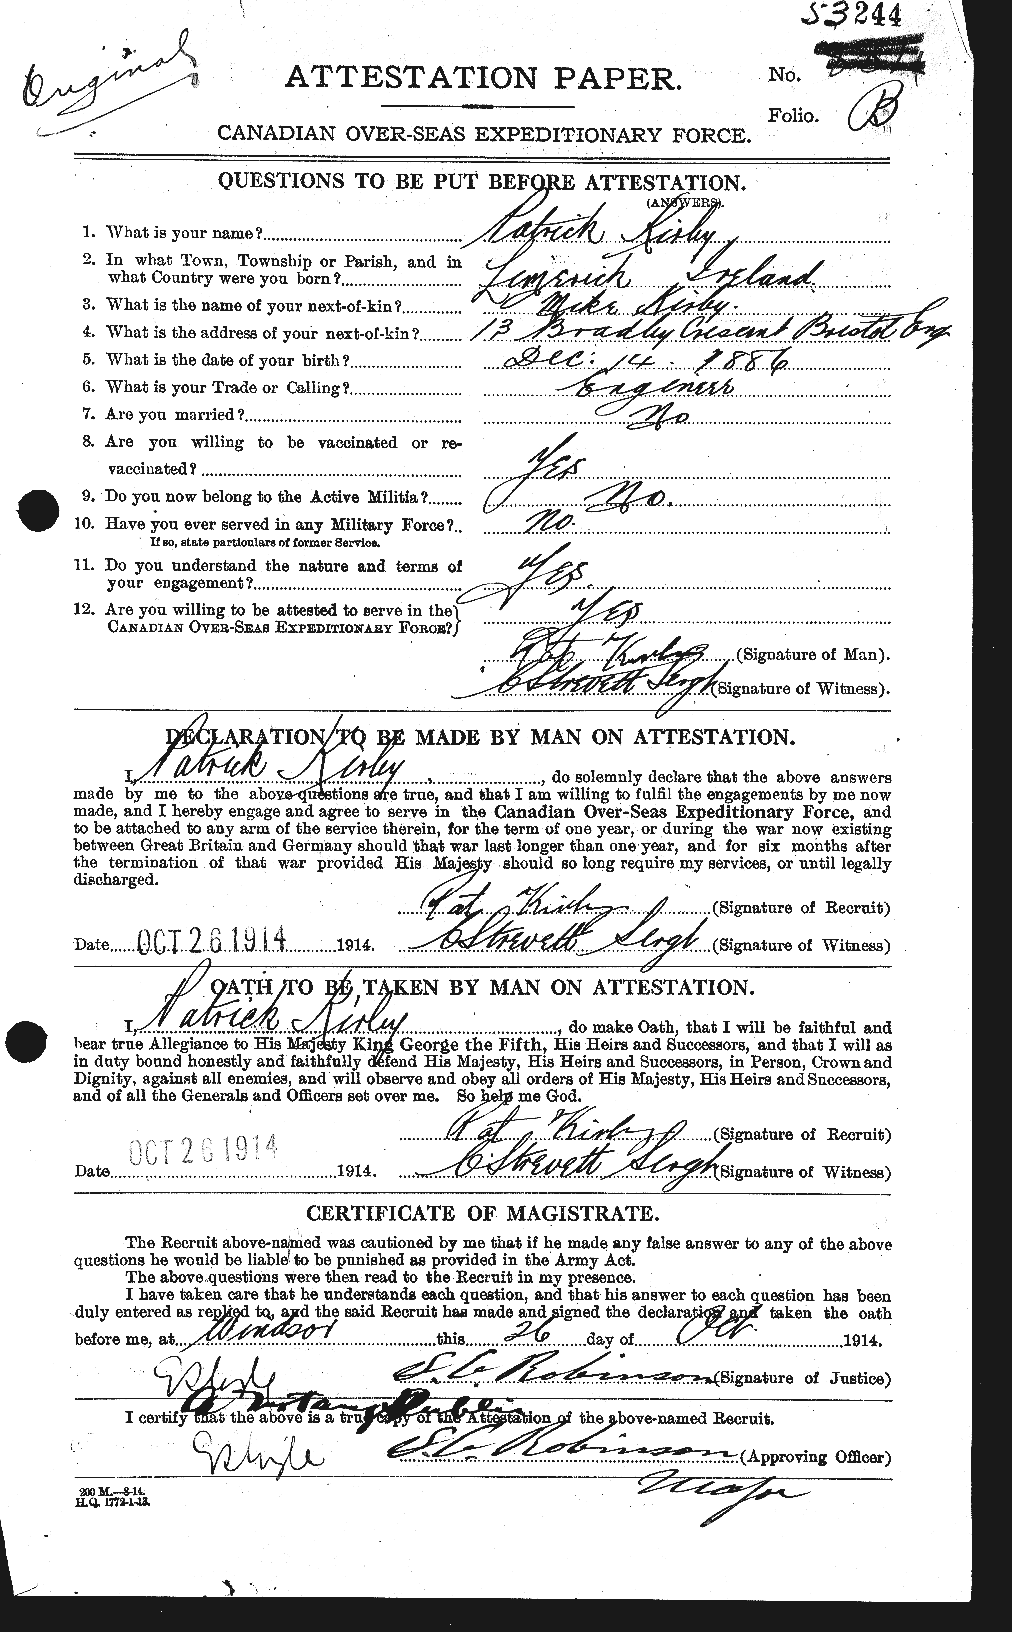 Personnel Records of the First World War - CEF 437257a